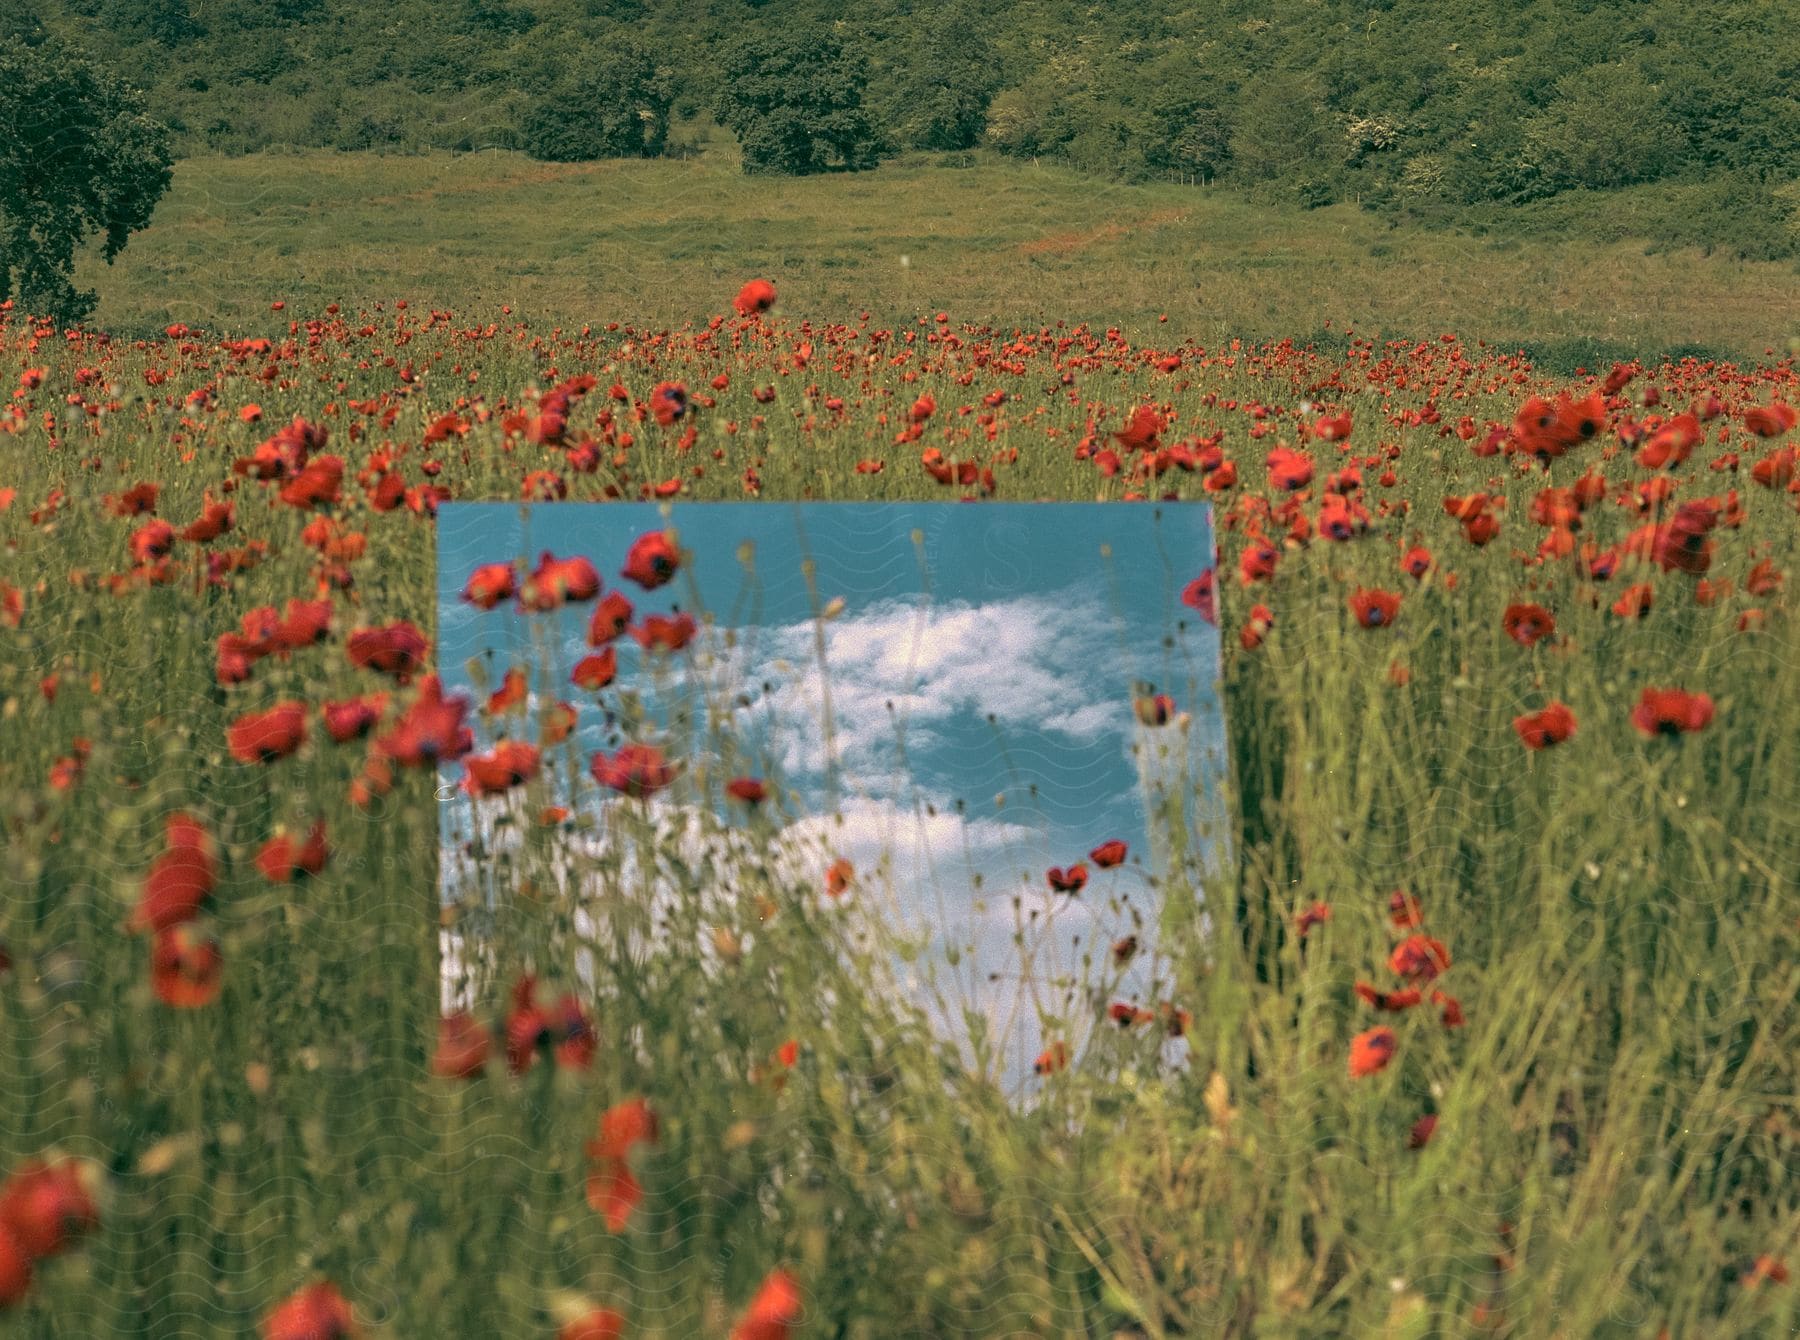 A serene scene of nature with a field of poppies and a pond